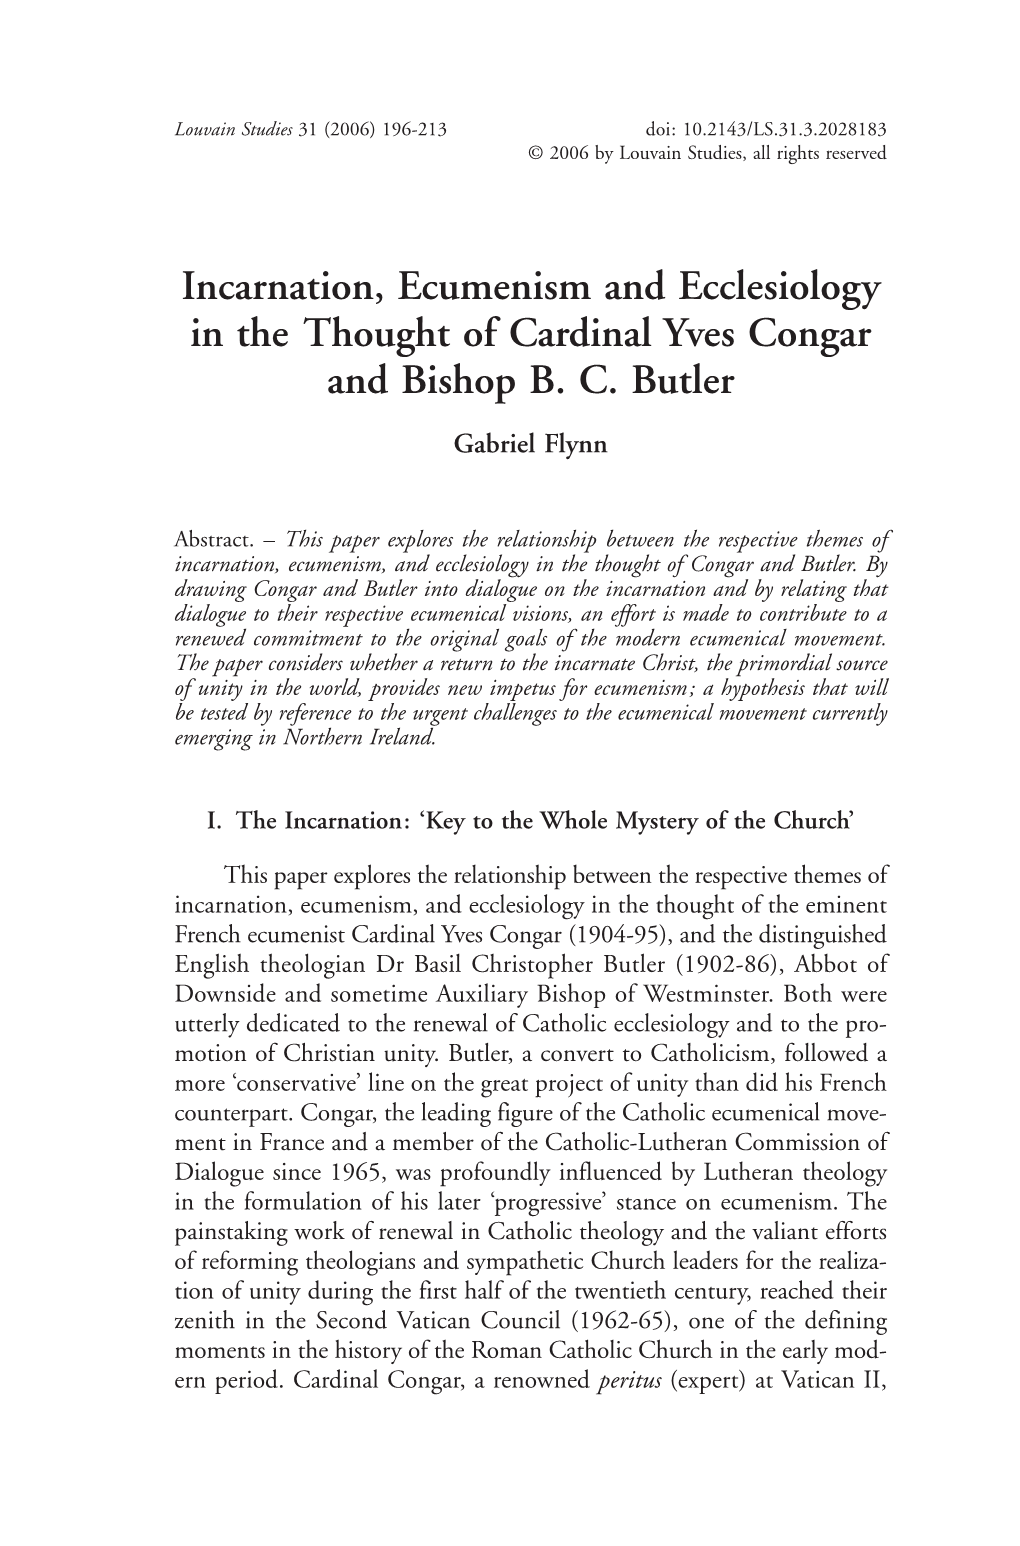 Incarnation, Ecumenism and Ecclesiology in the Thought of Cardinal Yves Congar and Bishop B